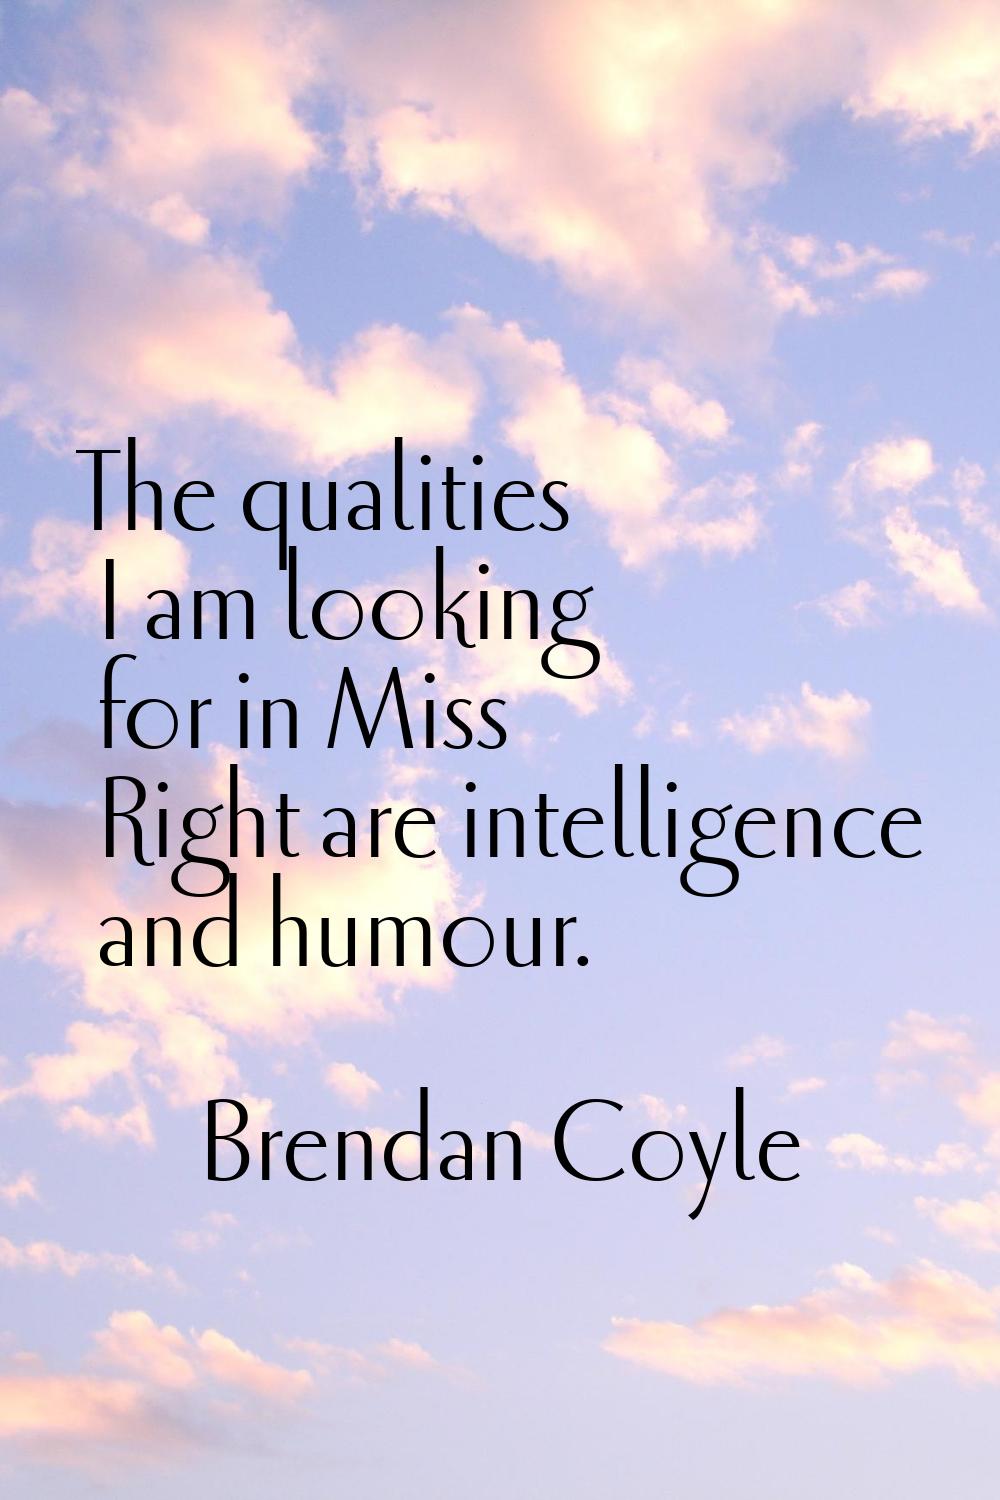 The qualities I am looking for in Miss Right are intelligence and humour.